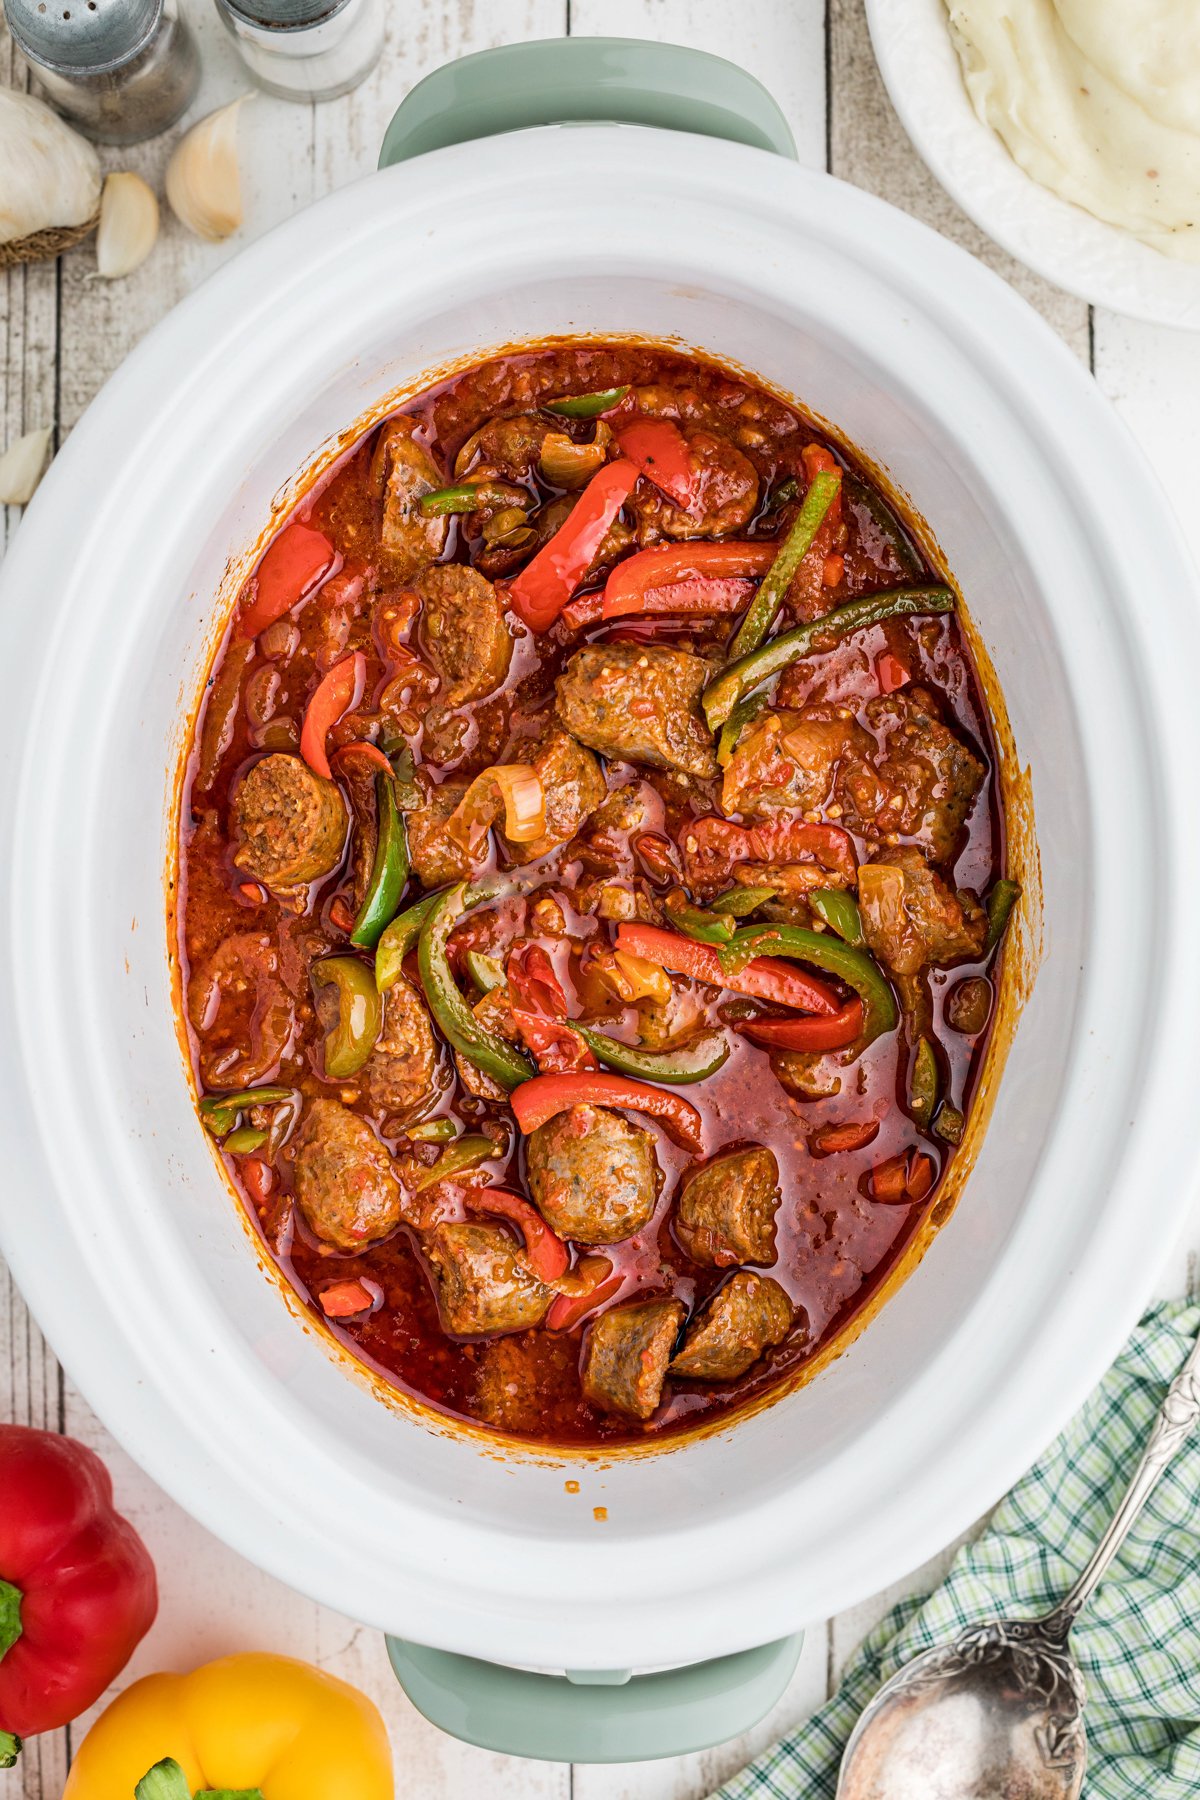 Cooked sausage and peppers in a marinara sauce.